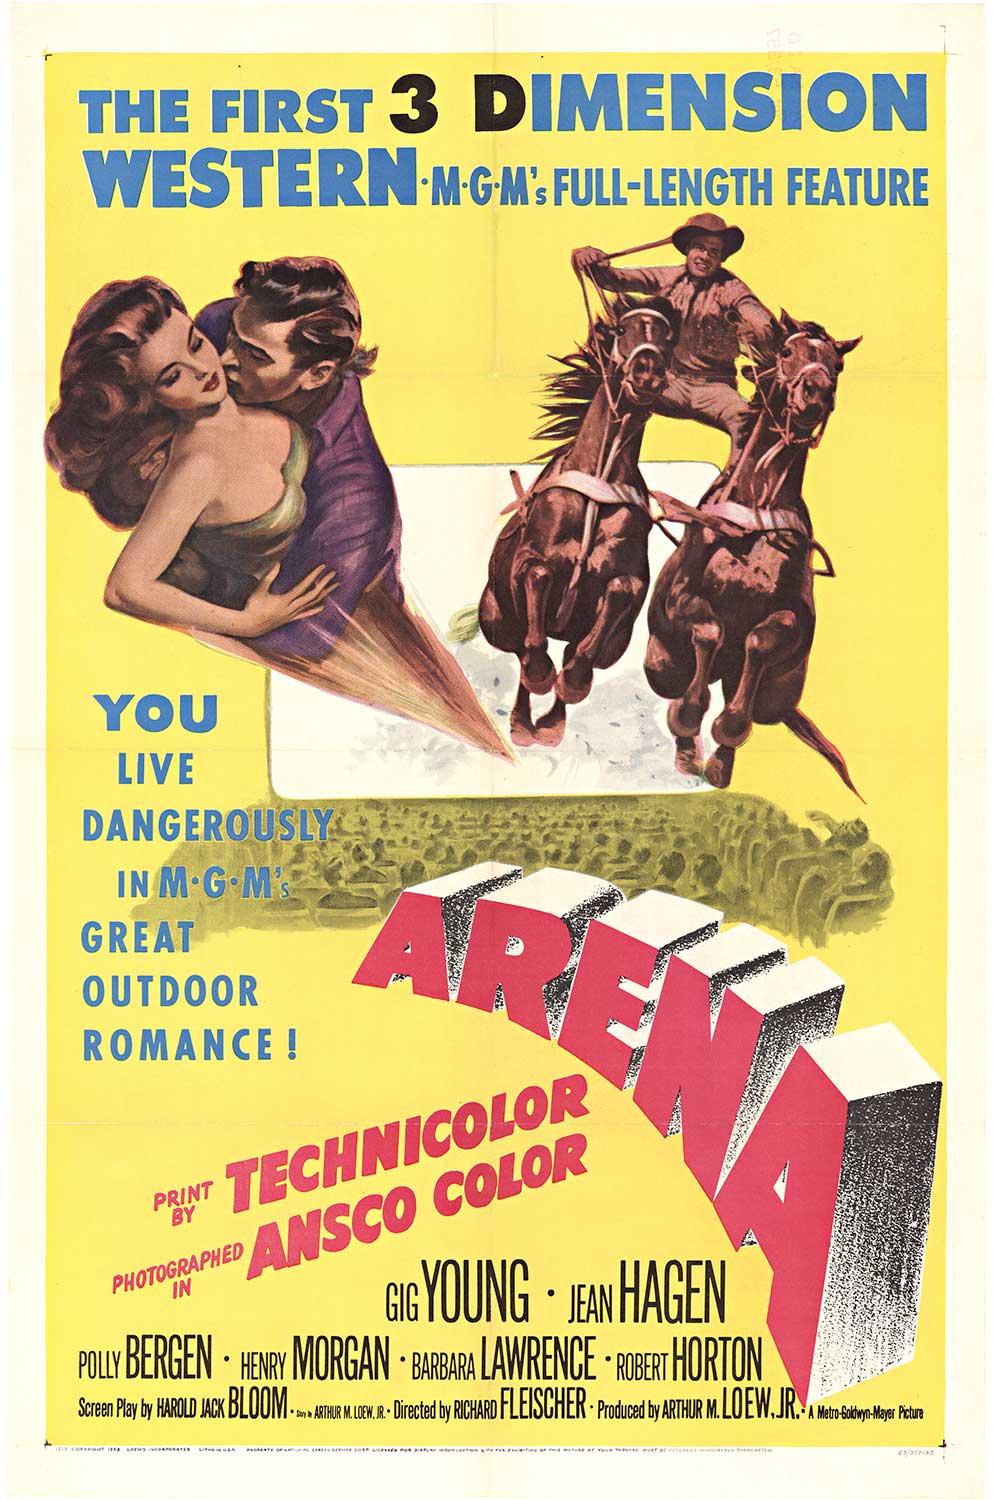 Unknown Figurative Print - "Arena" First 3 Dimension Western vintage movie poster  1953  US 1-sheet